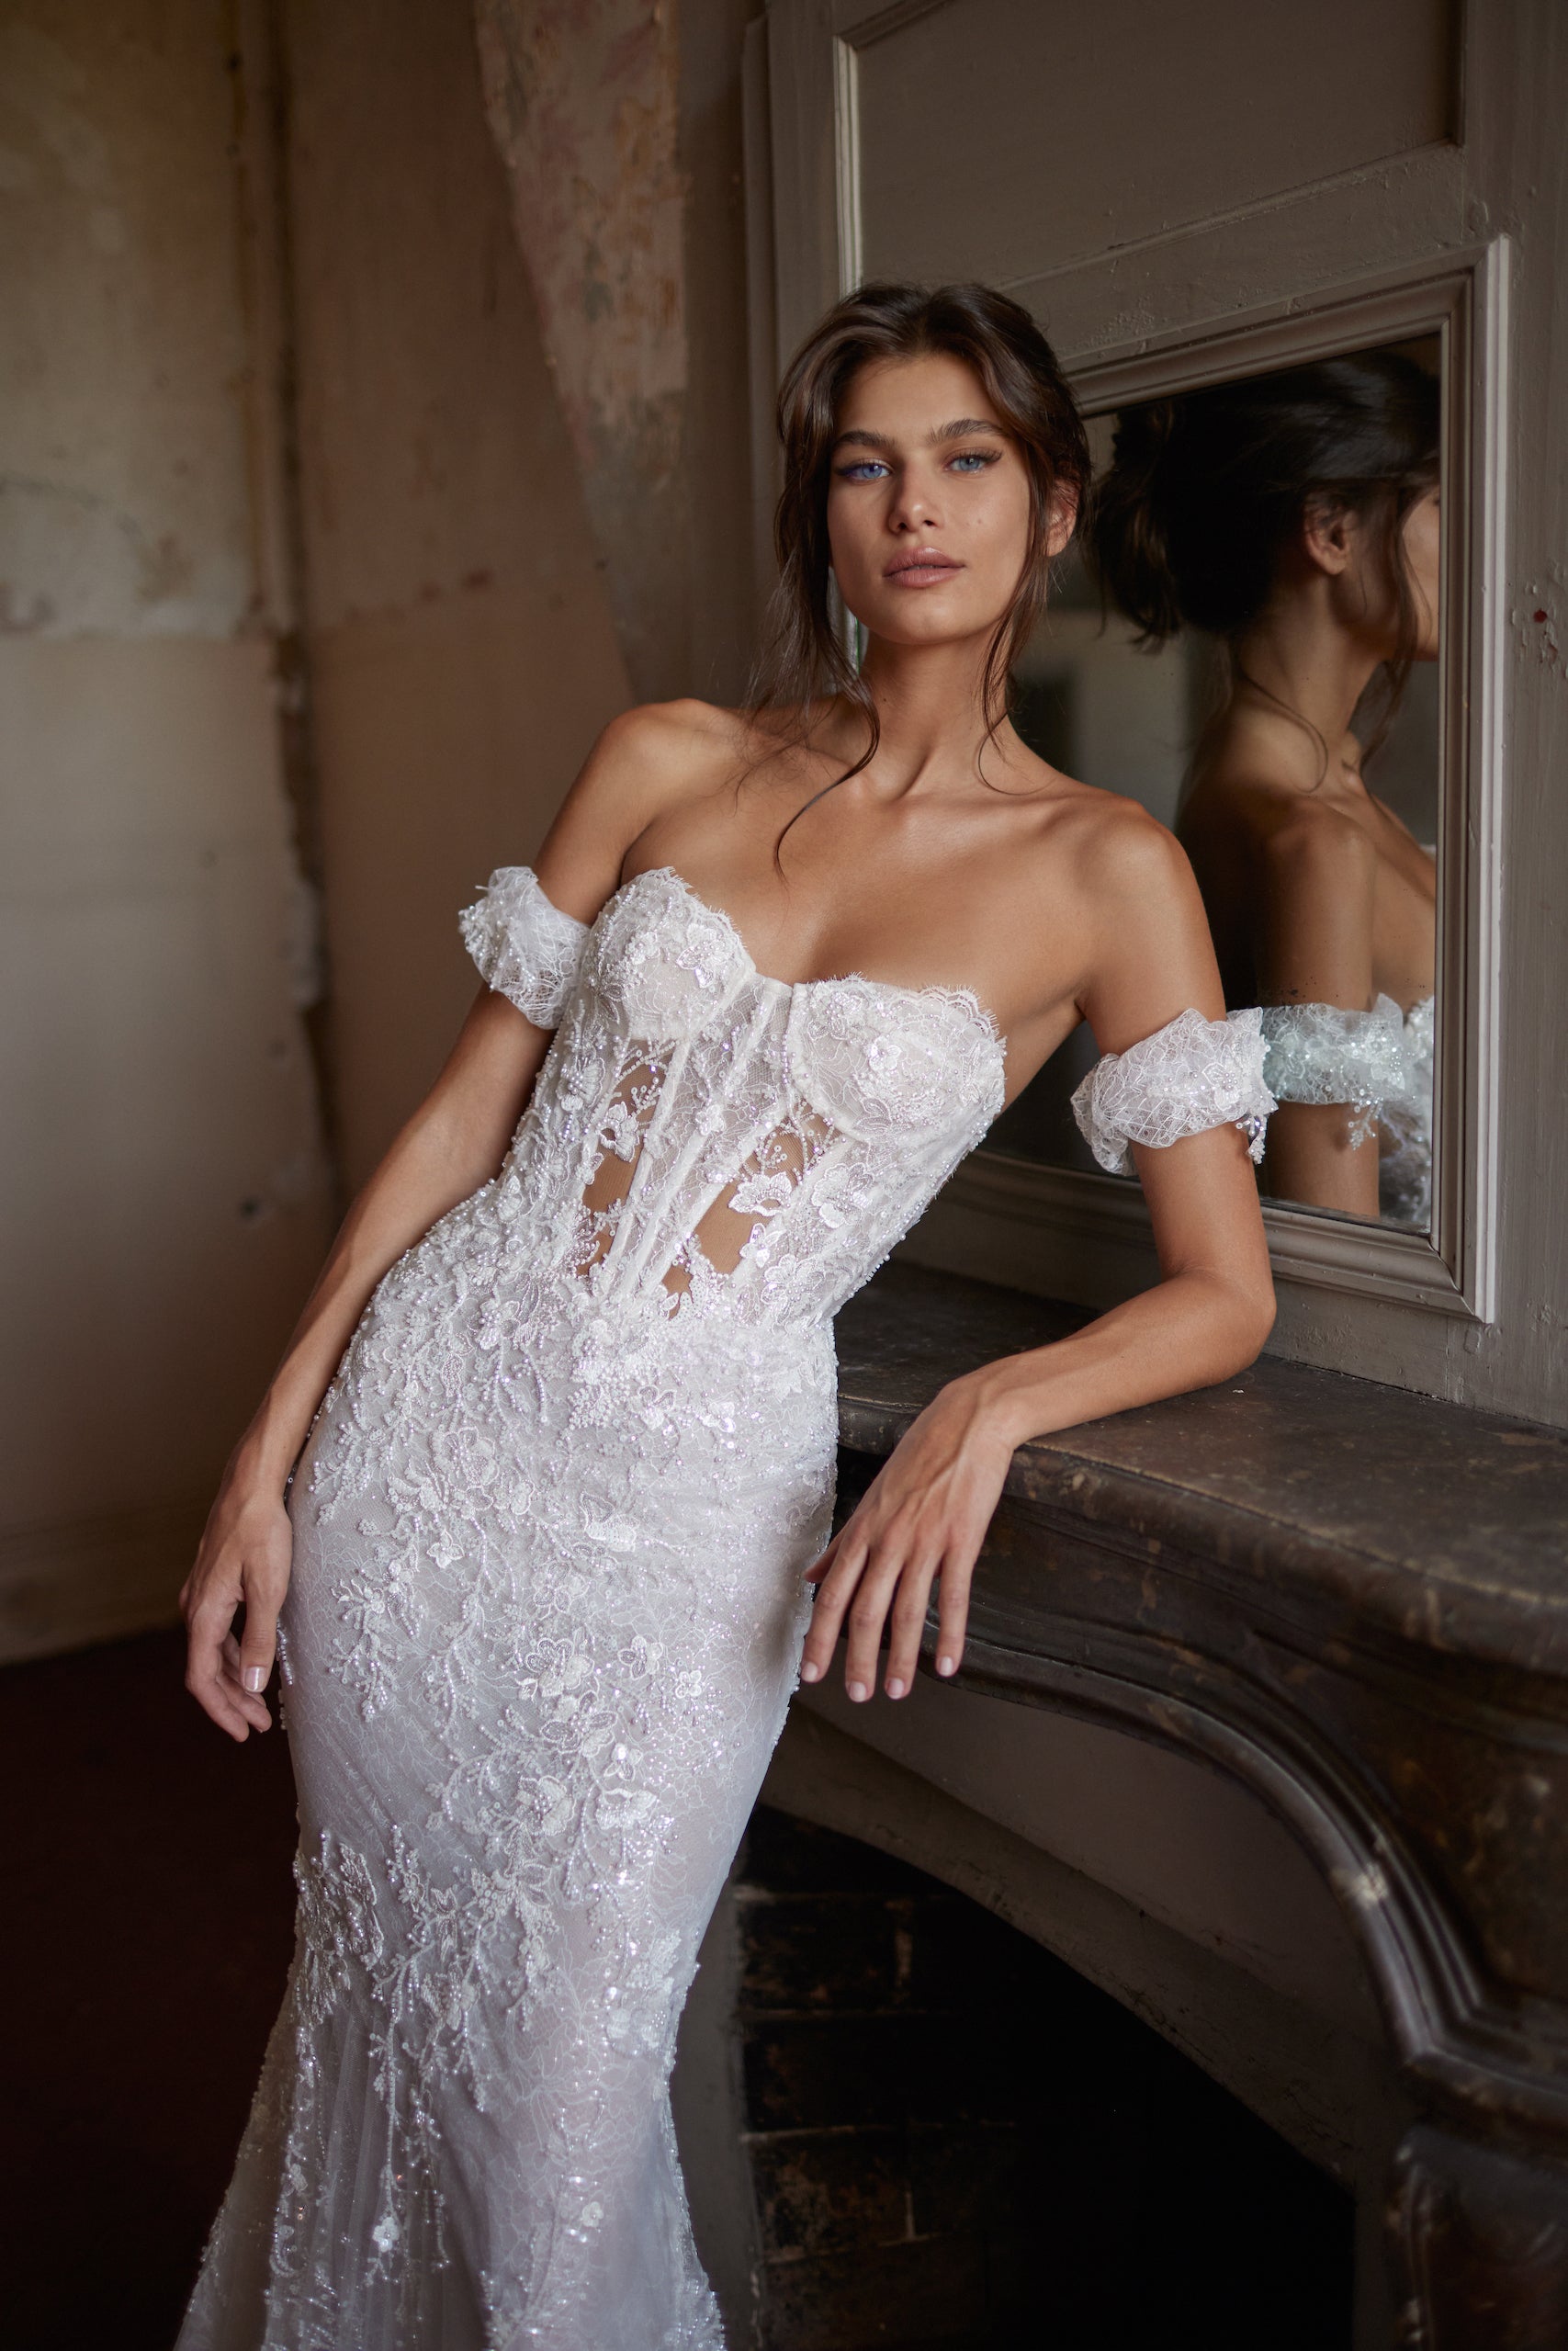 Romantic Lace Fit-and-Flare Gown With Sheer Details by Netta BenShabu Elite Couture - Image 1